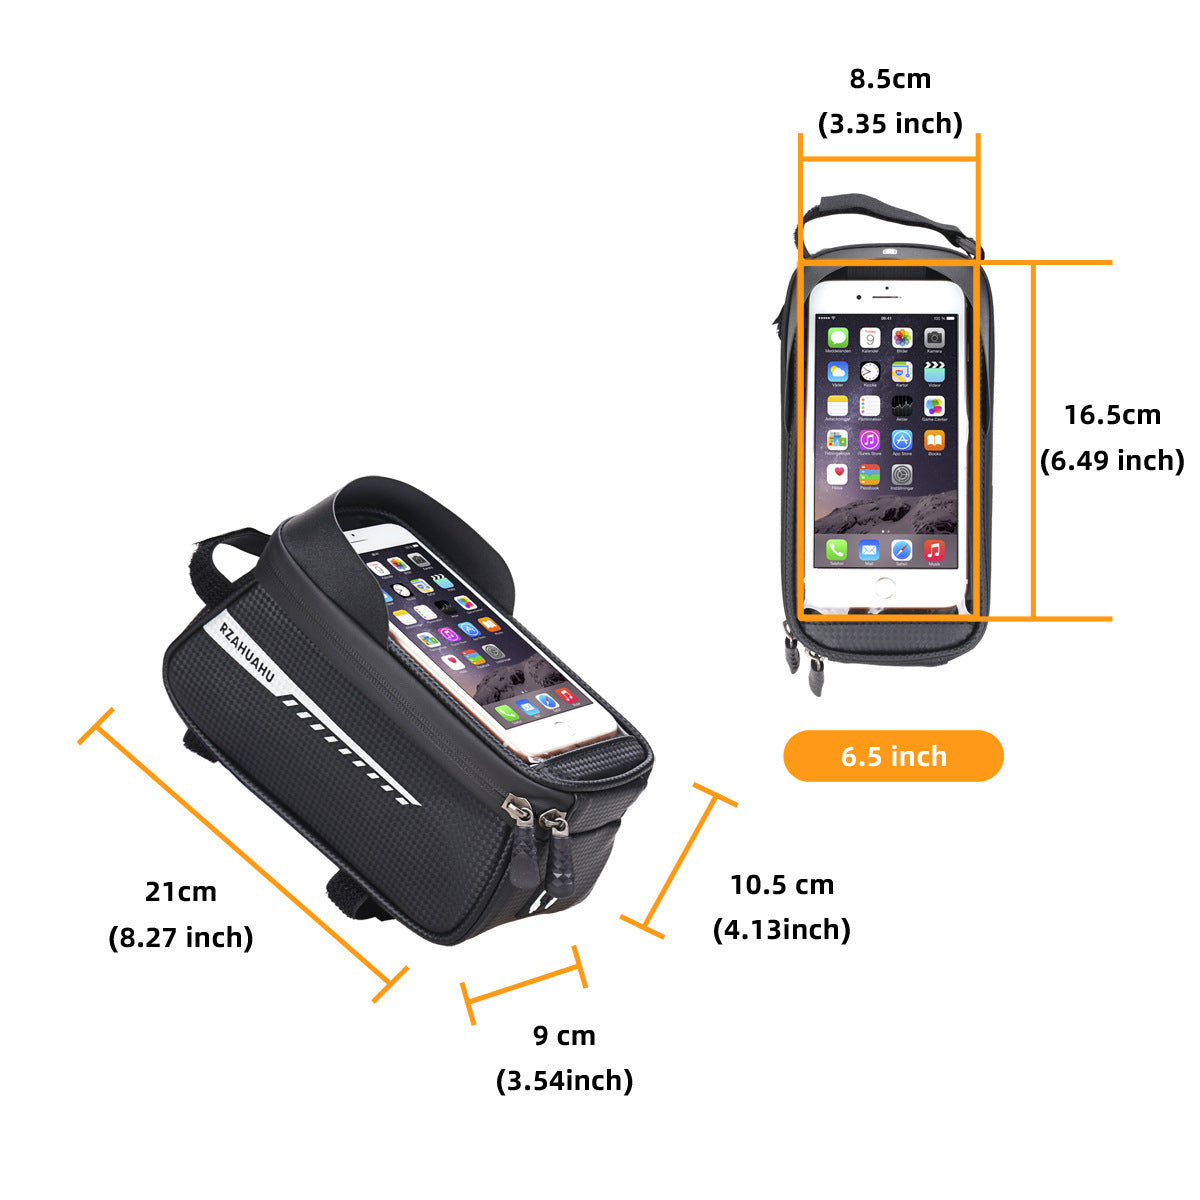 Jasion Ebike® EBike Waterproof Top Tube Cell Phone Pouch with Touchscreen